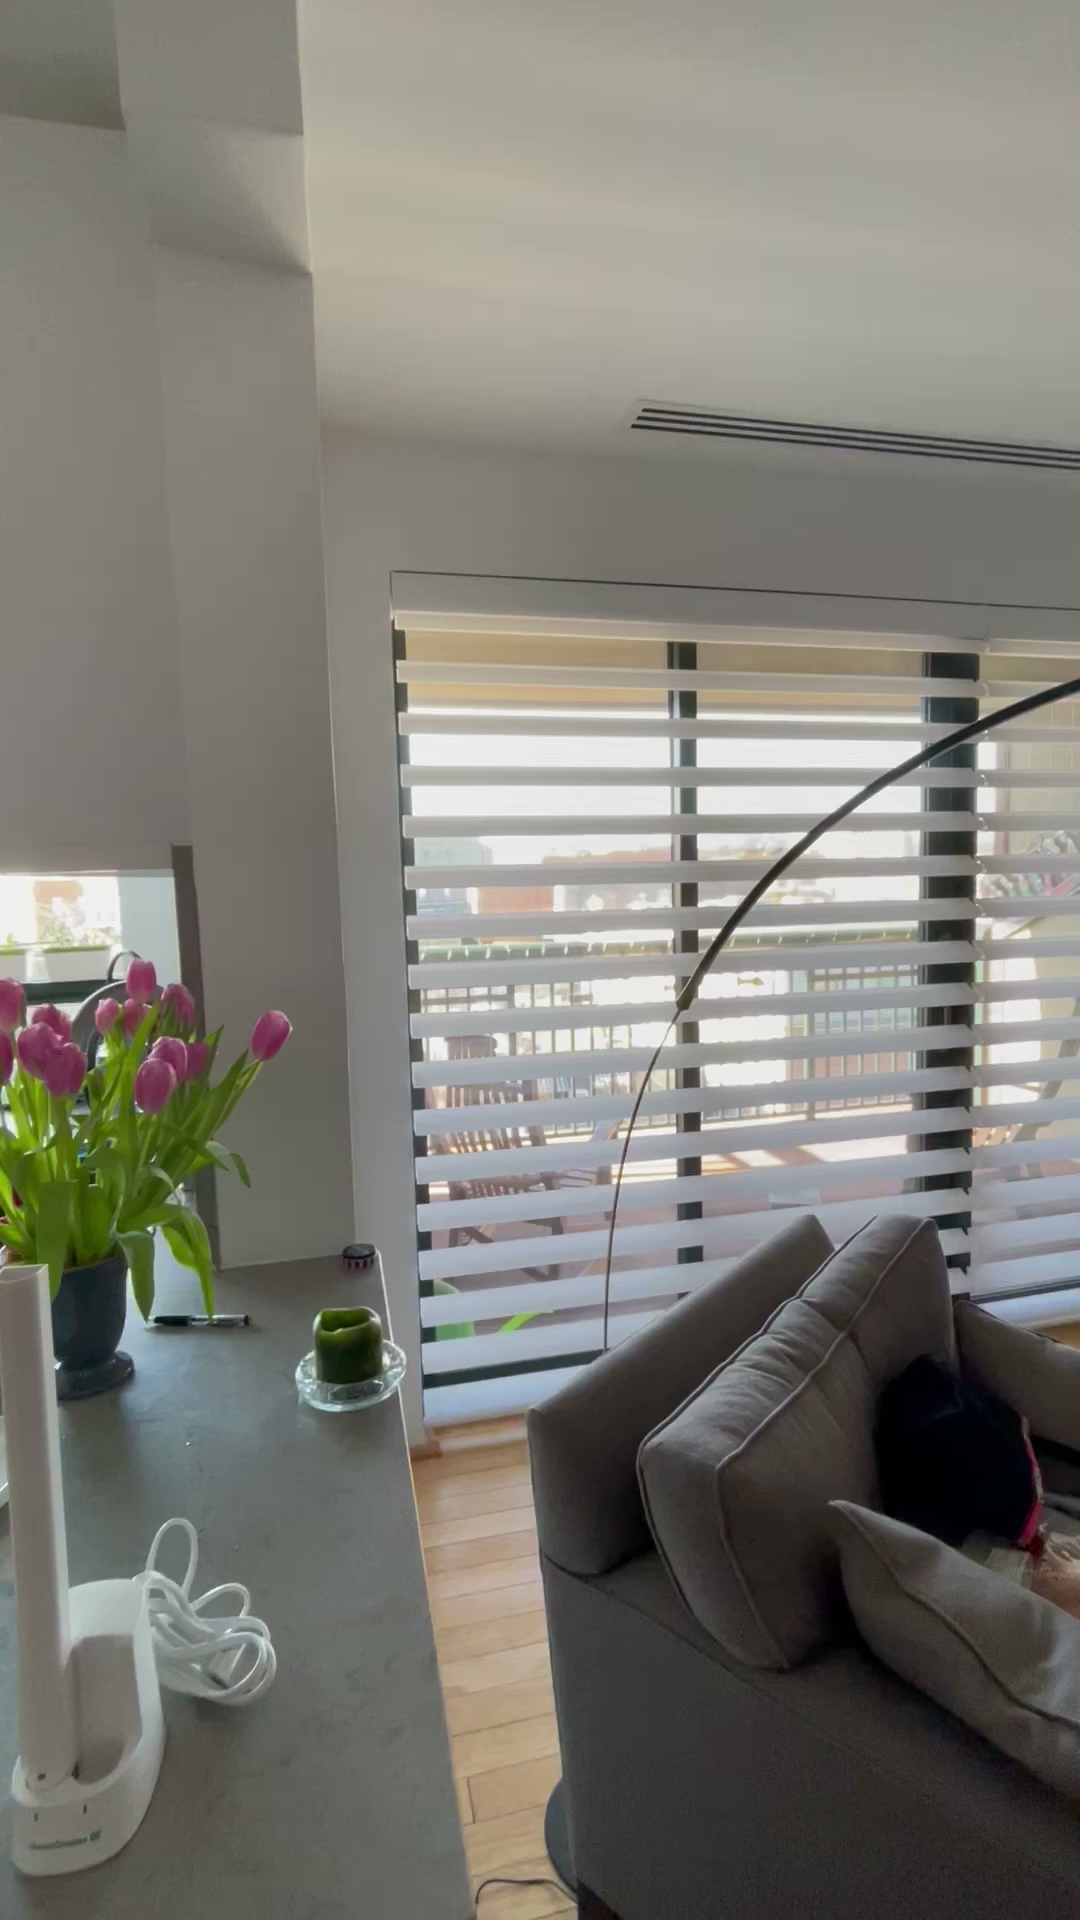 Home Sweet Home (HSH) Blinds Shades Curtains 1 Sylvan Ave, Englewood Cliffs New Jersey 07632